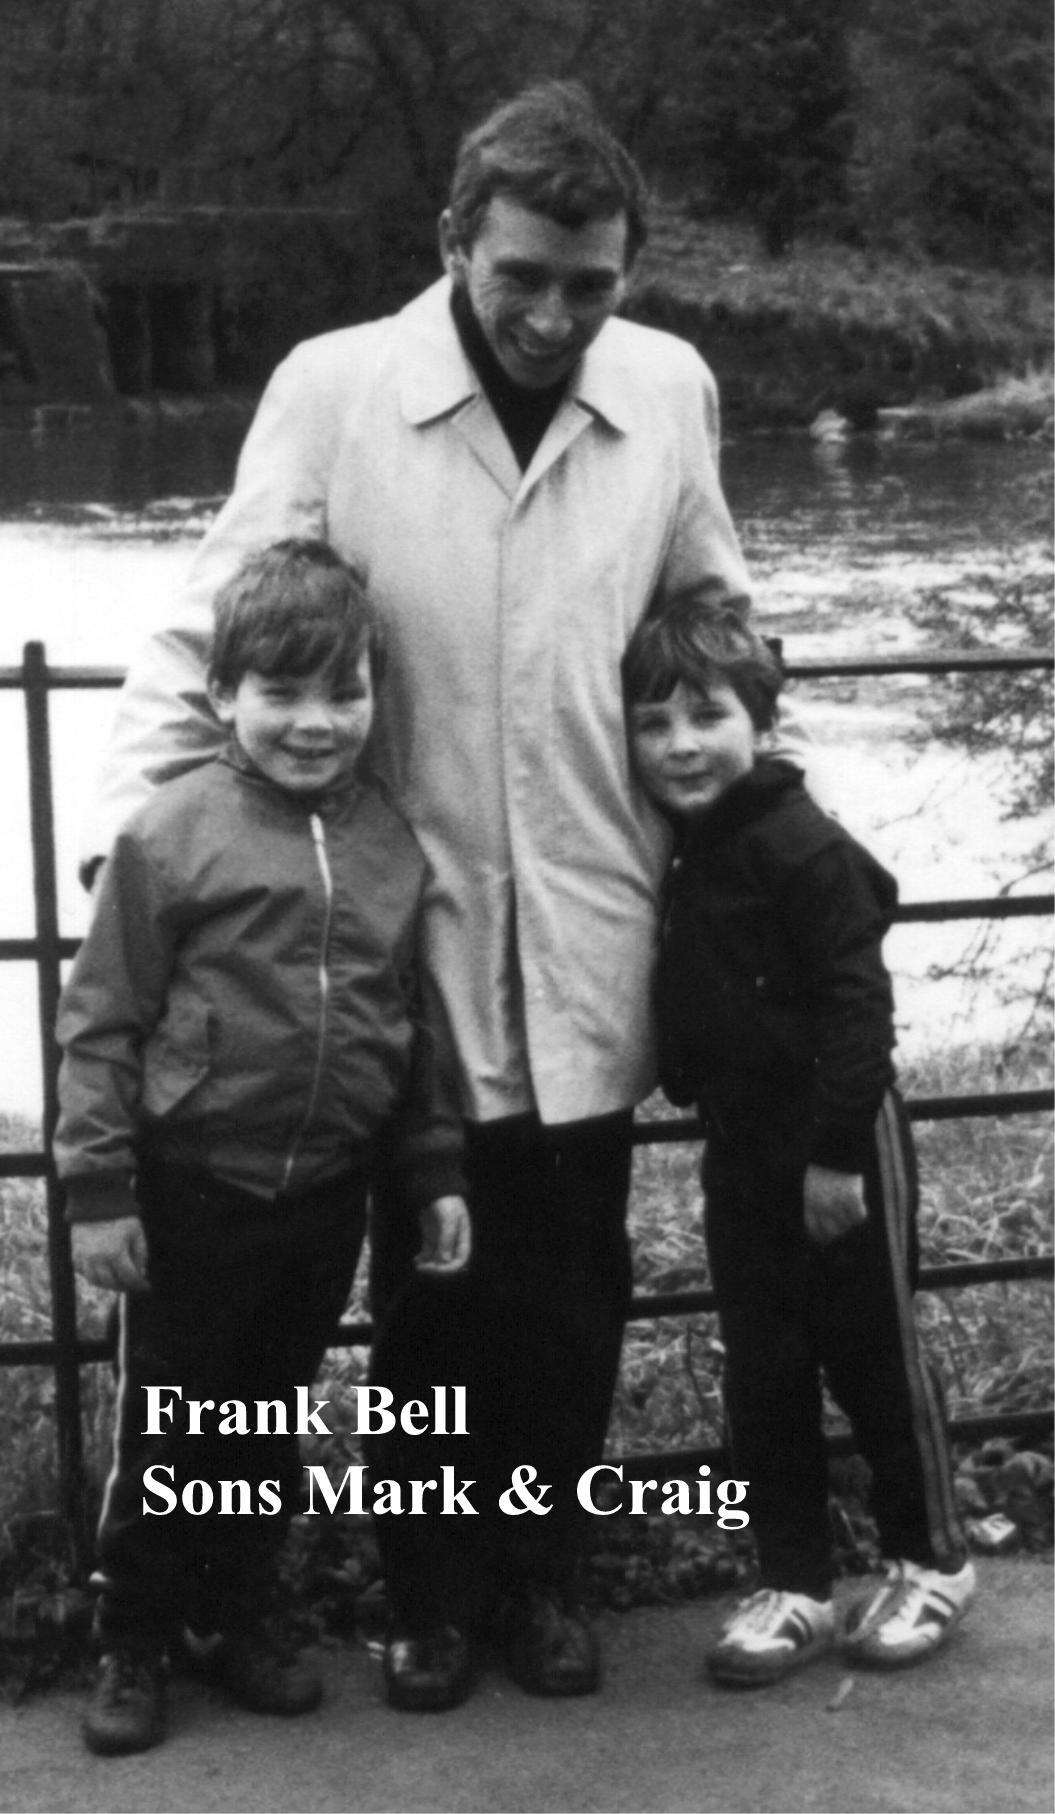 Copy of Frank Bell & sons